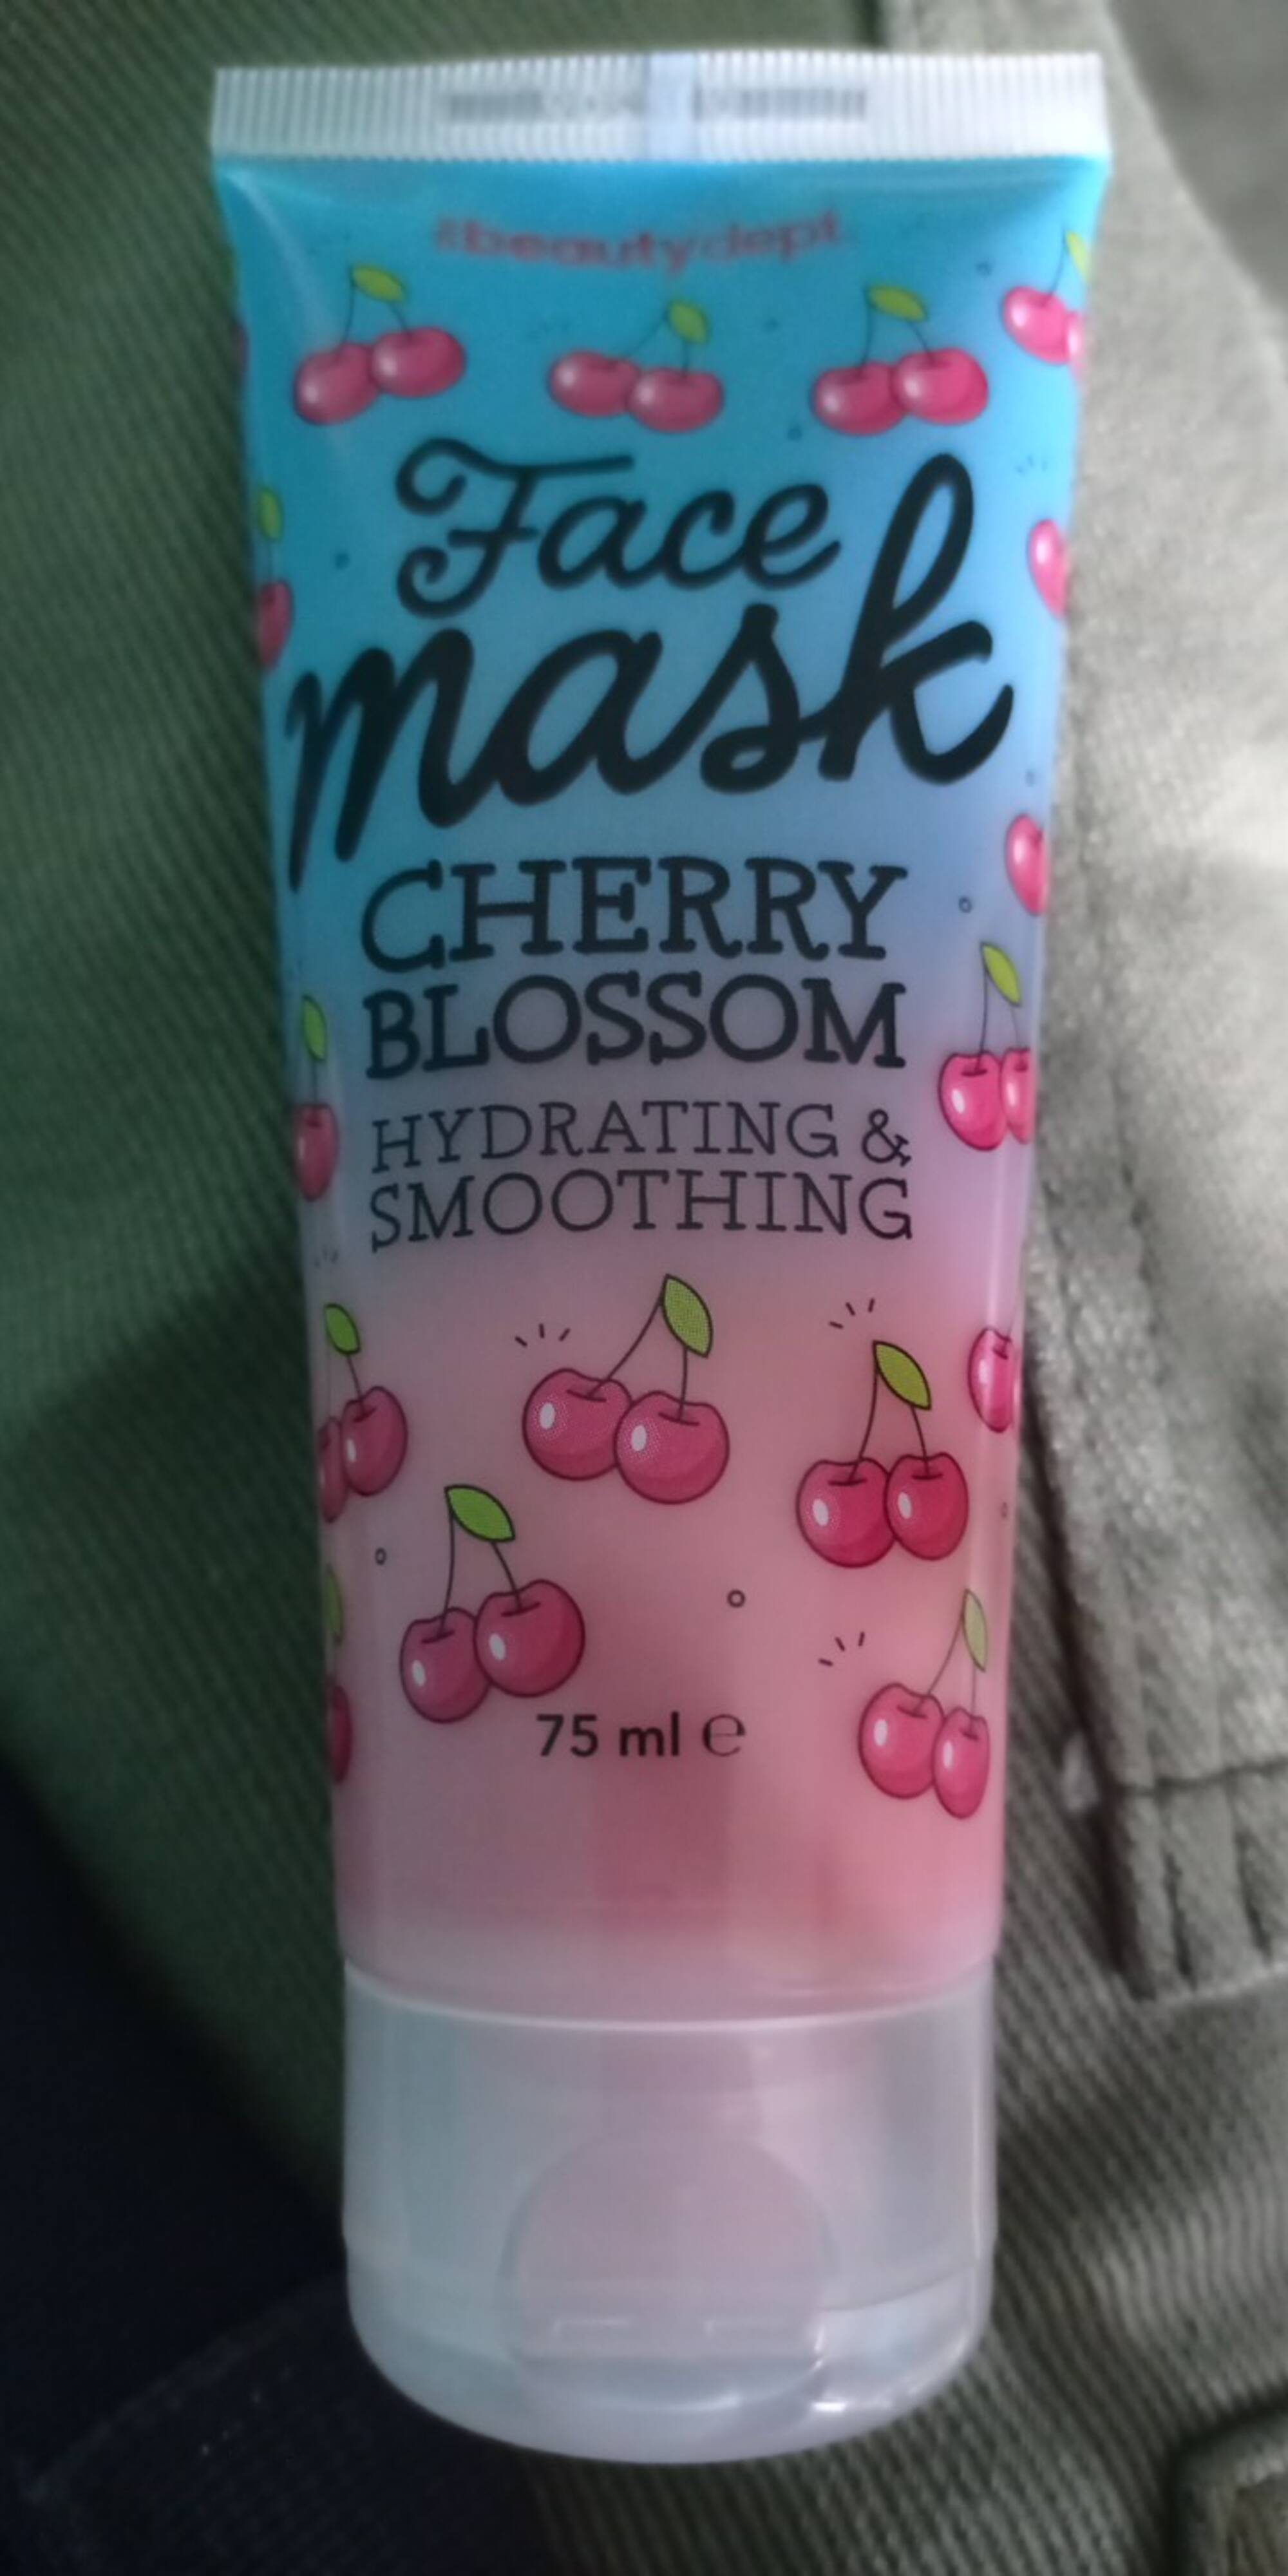 THE BEAUTY DEPT - Cherry blossom - Face Mask